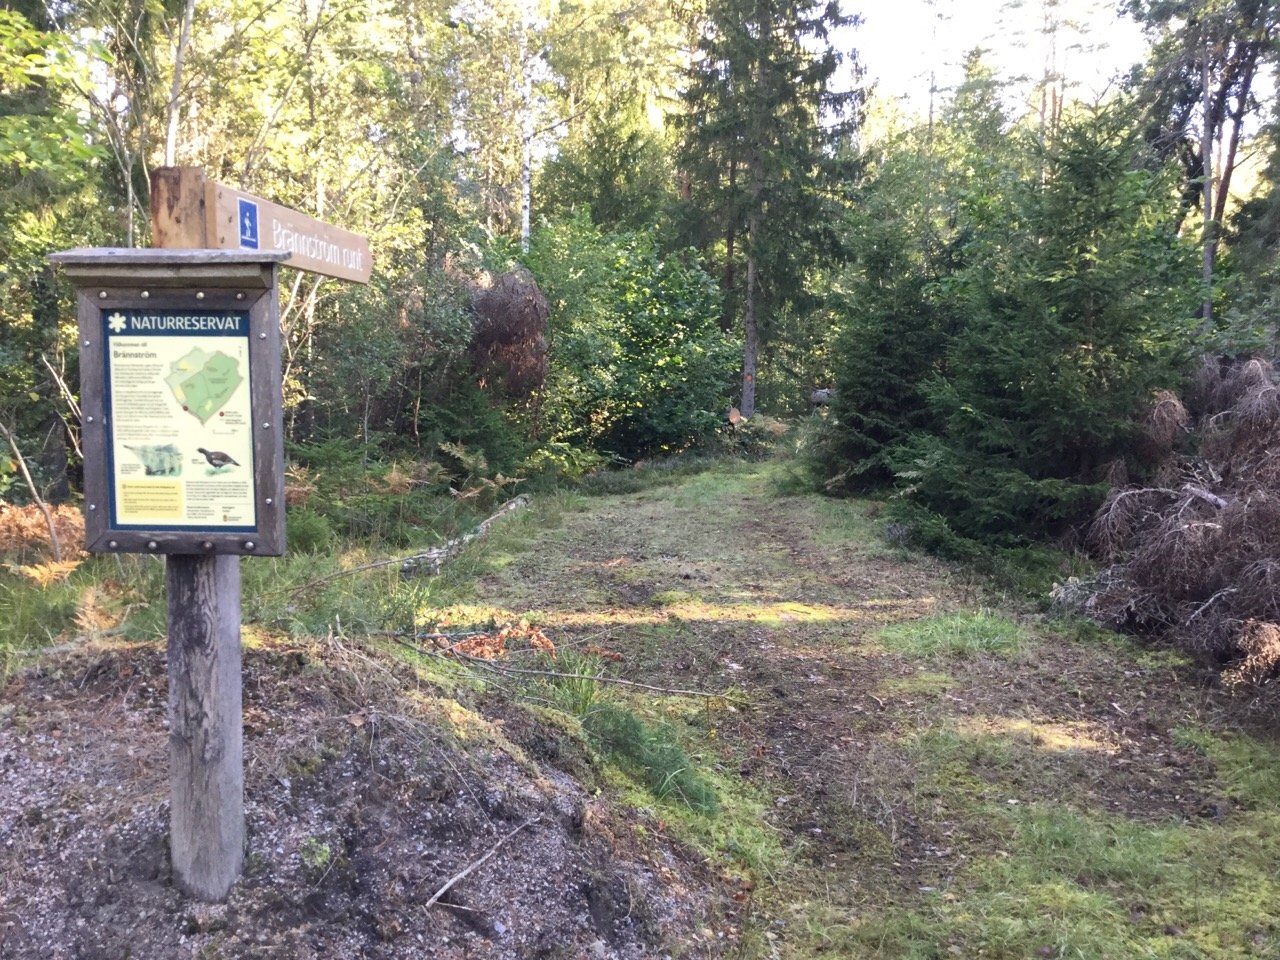 Informational sign and hiking trail in Brännström nature reserve.